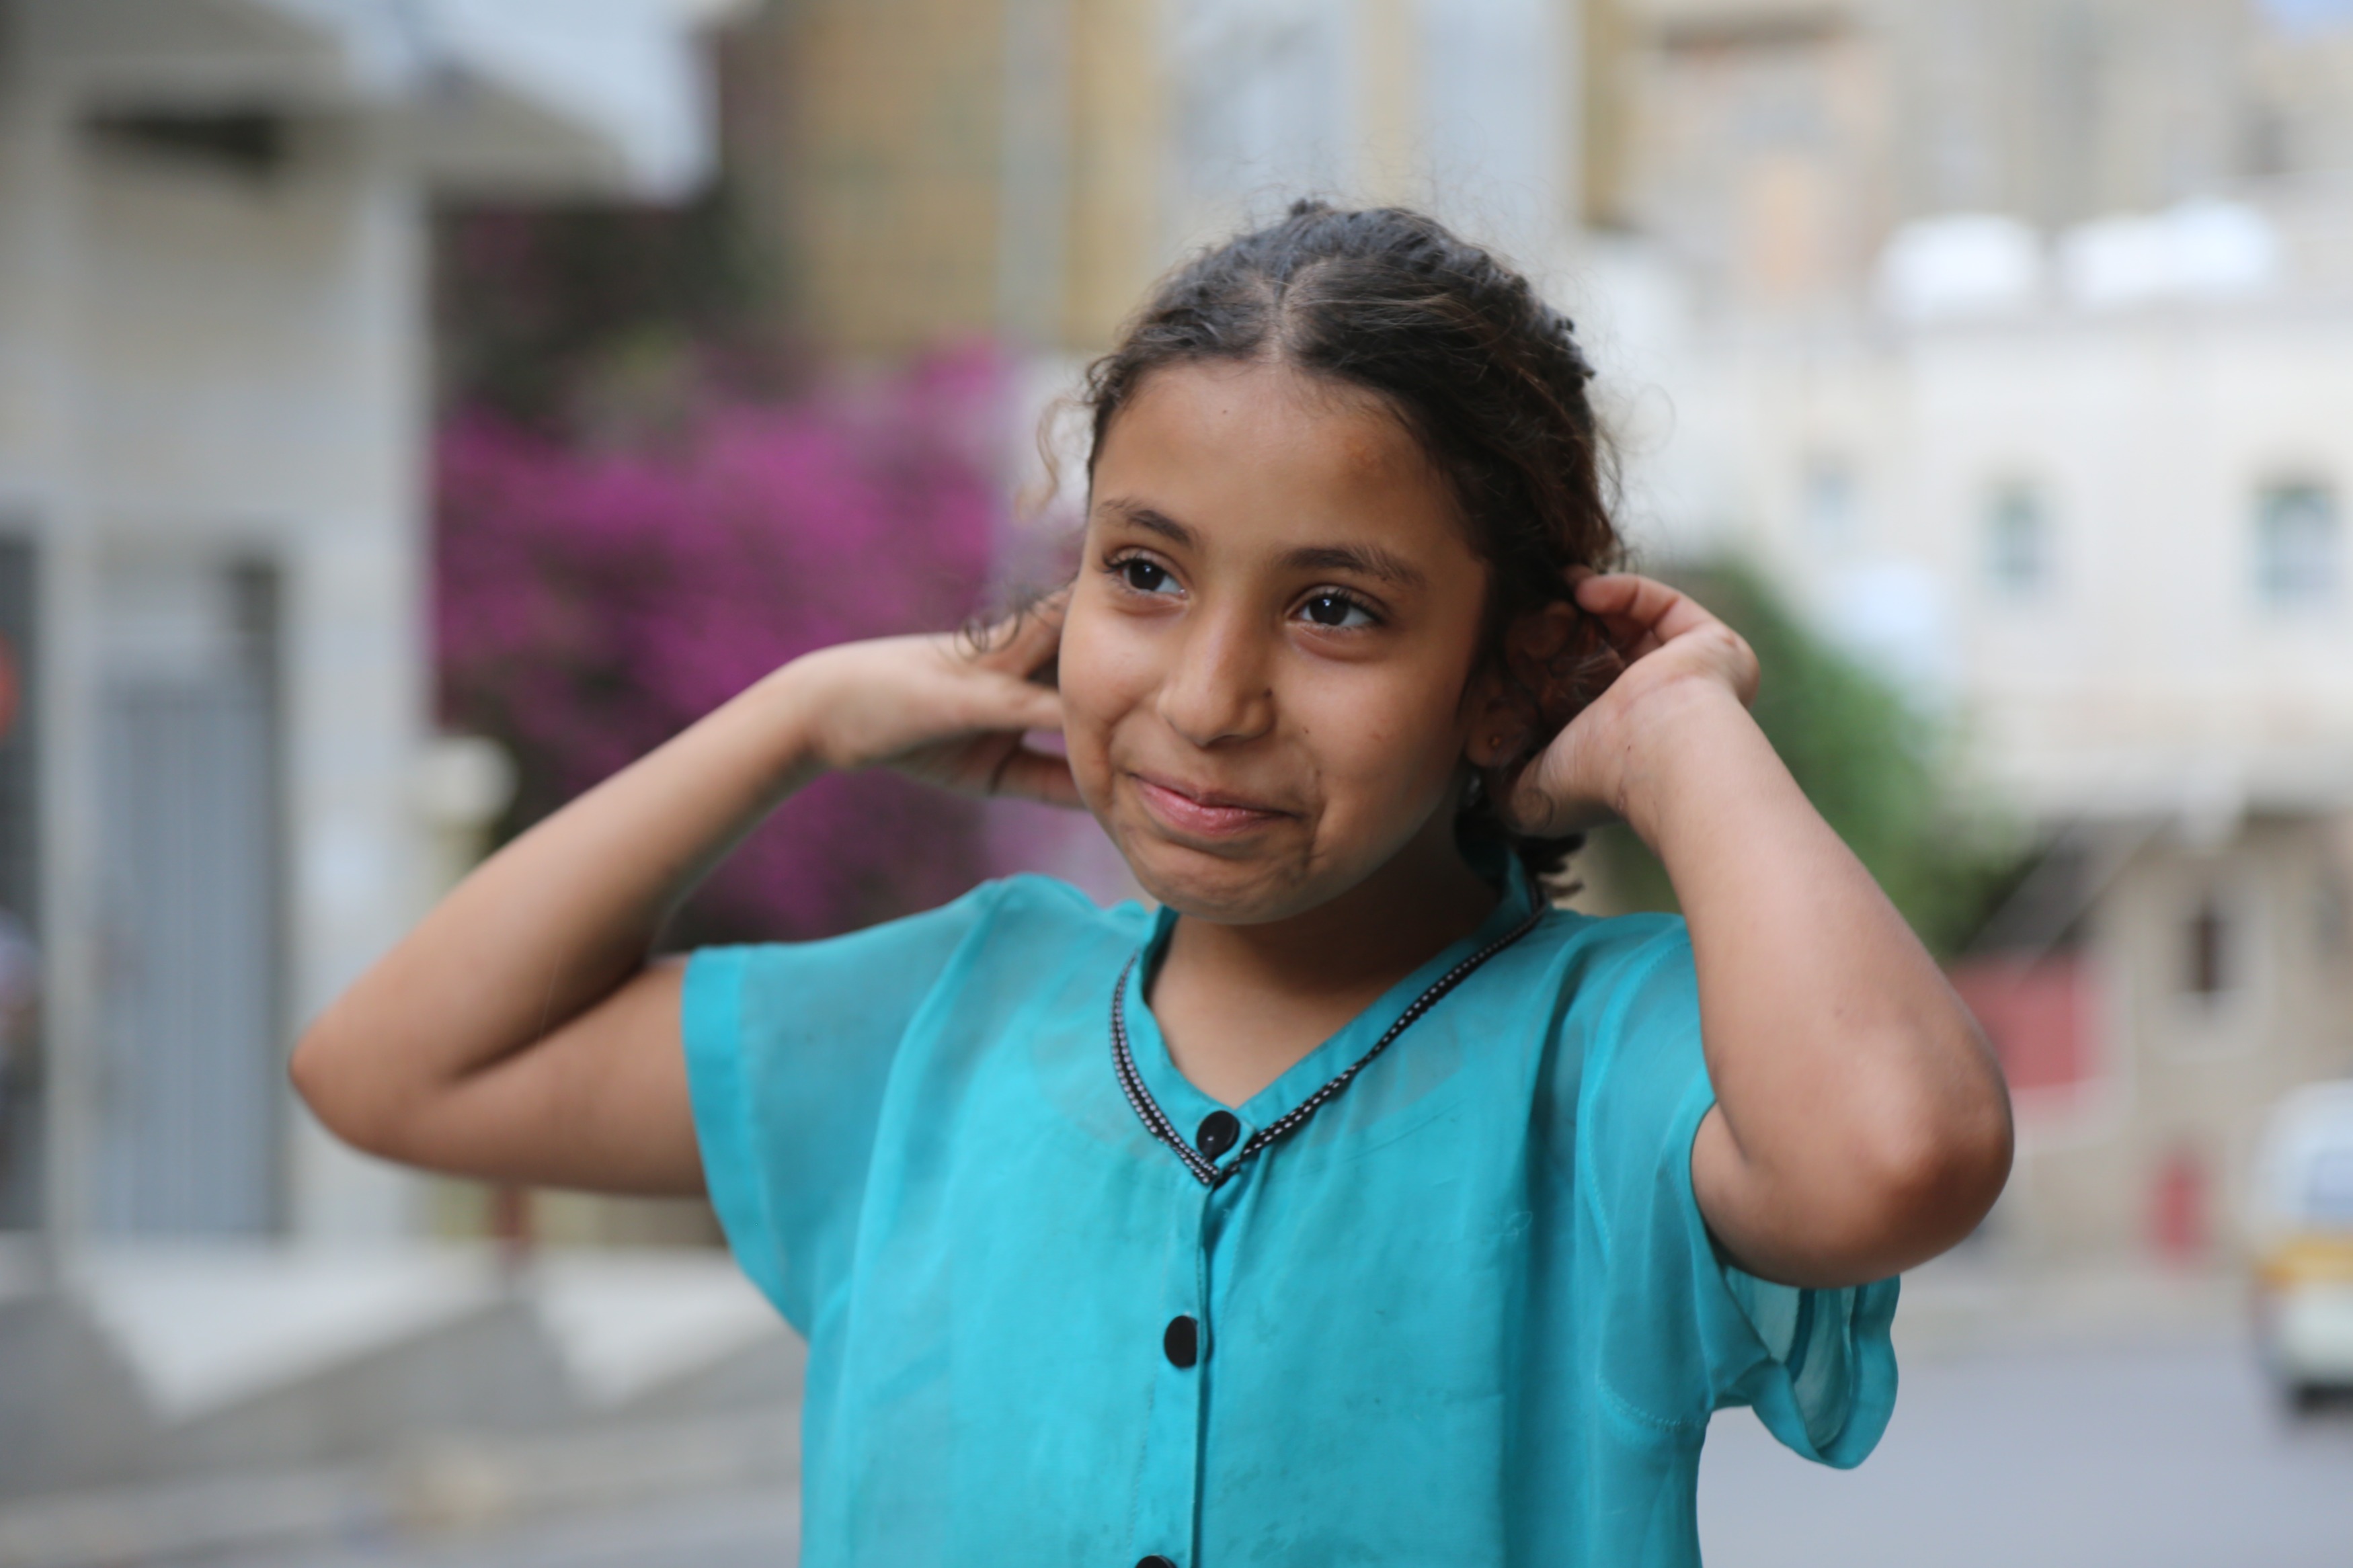 'I don’t believe these good days can come back again': Sama reminisces of happier Eids spent with her parents (MEE/Khalid al-Banna)